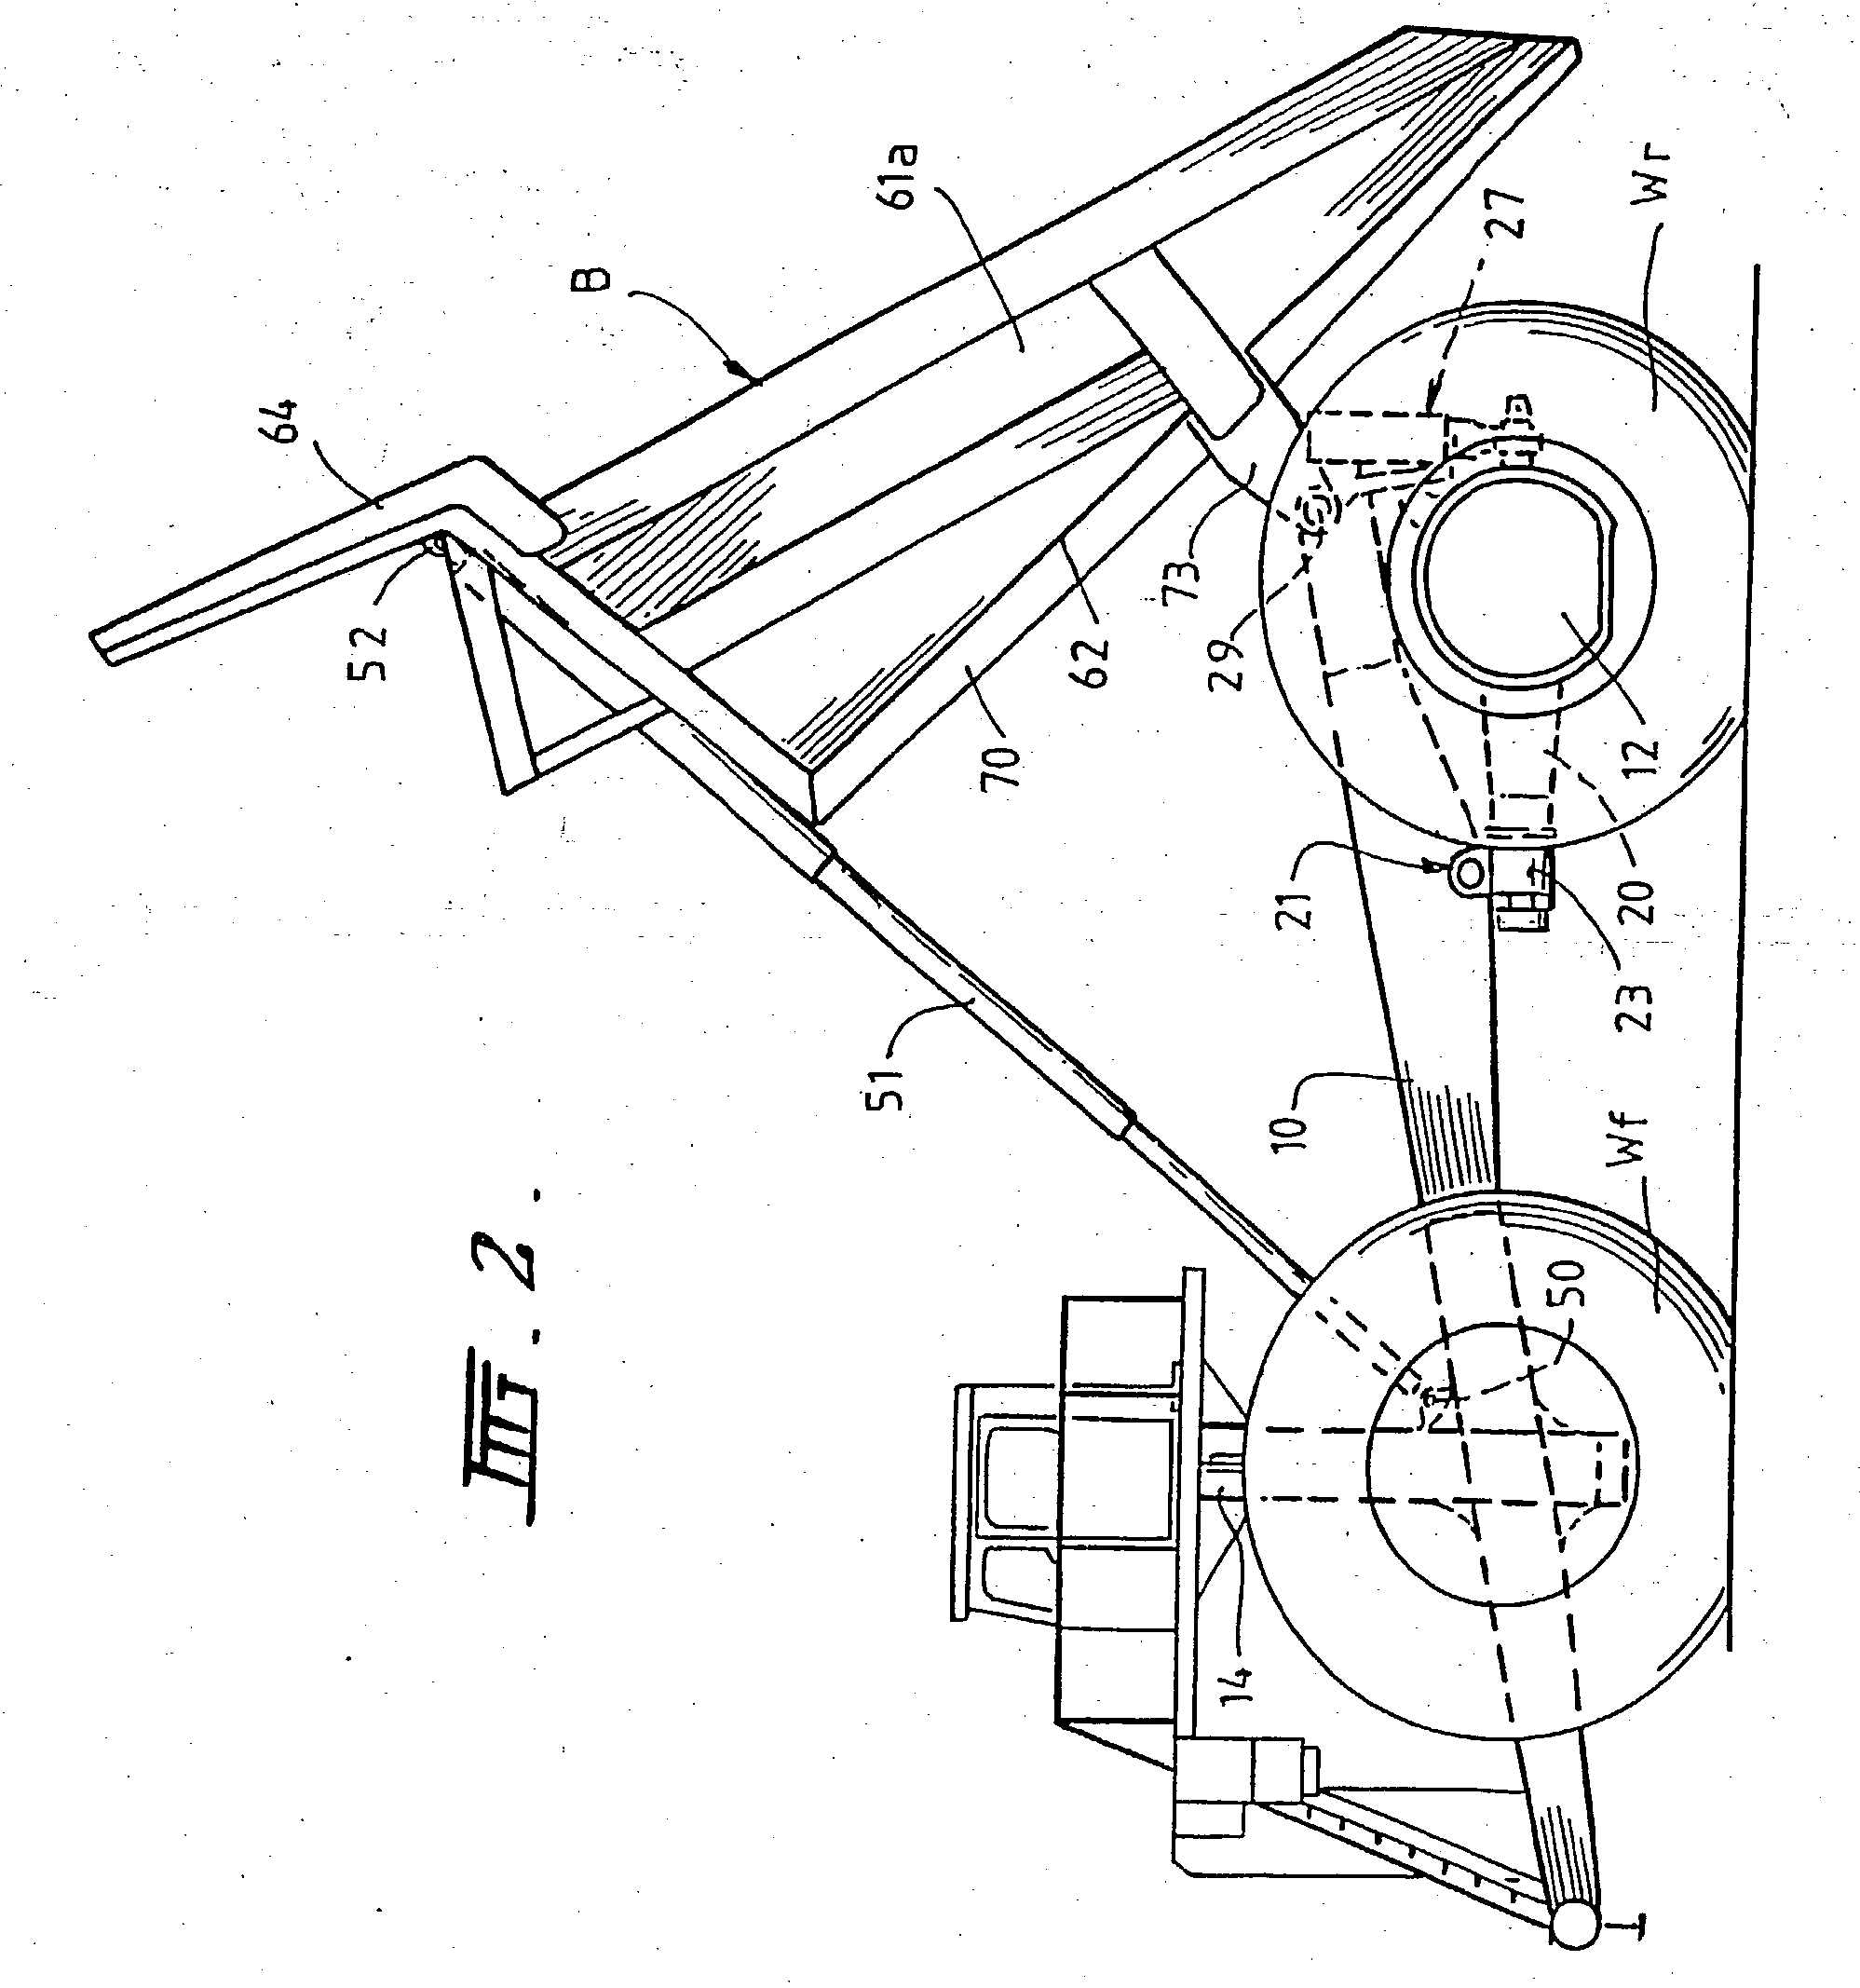 Suspension system and body for large dump trucks